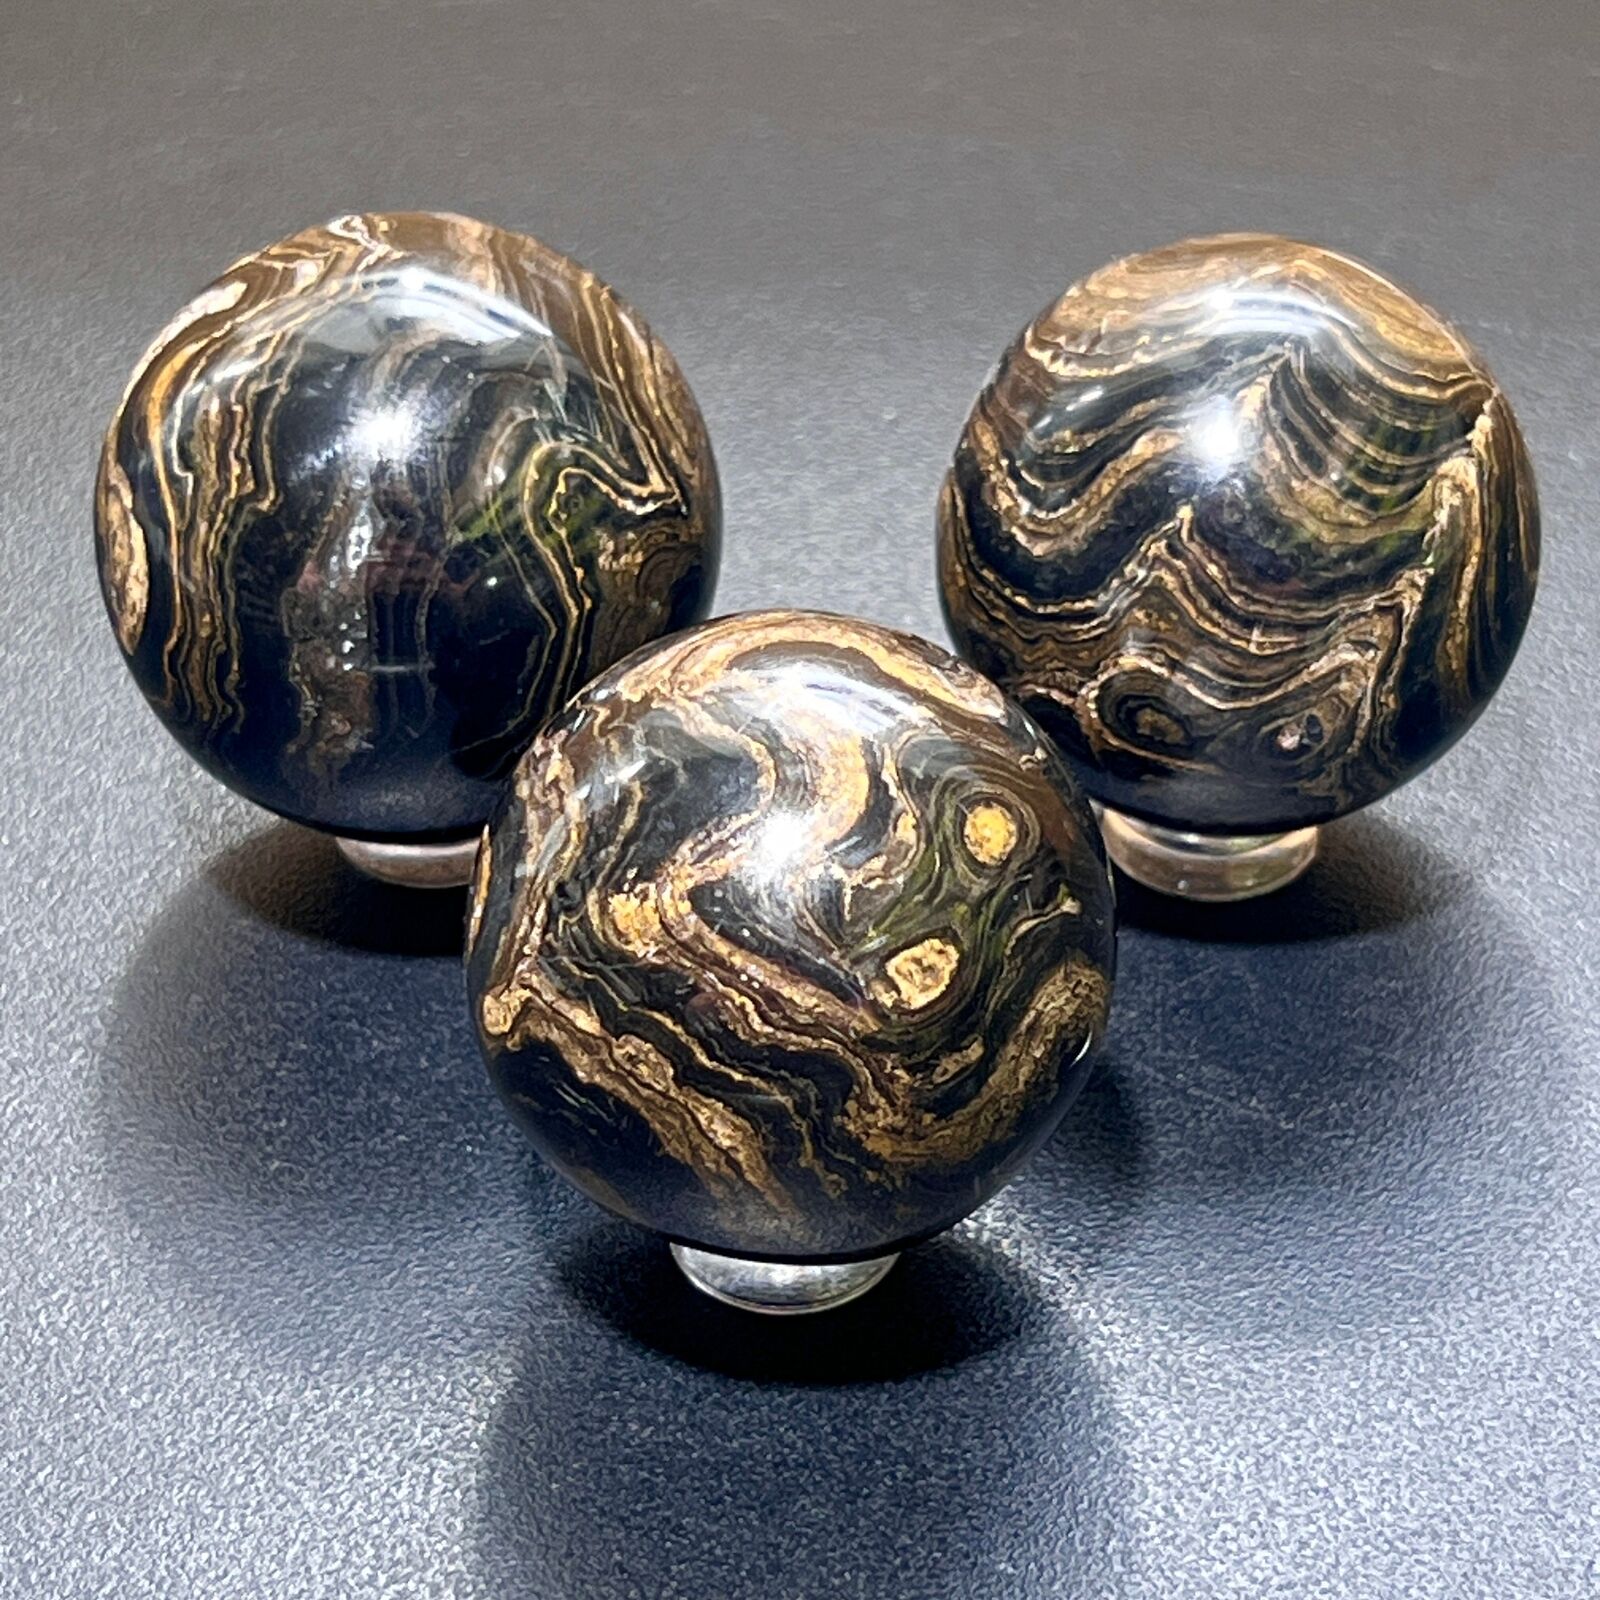 Stromatolite Fossil Spheres (1.5 Inches) Polished Natural Gemstones